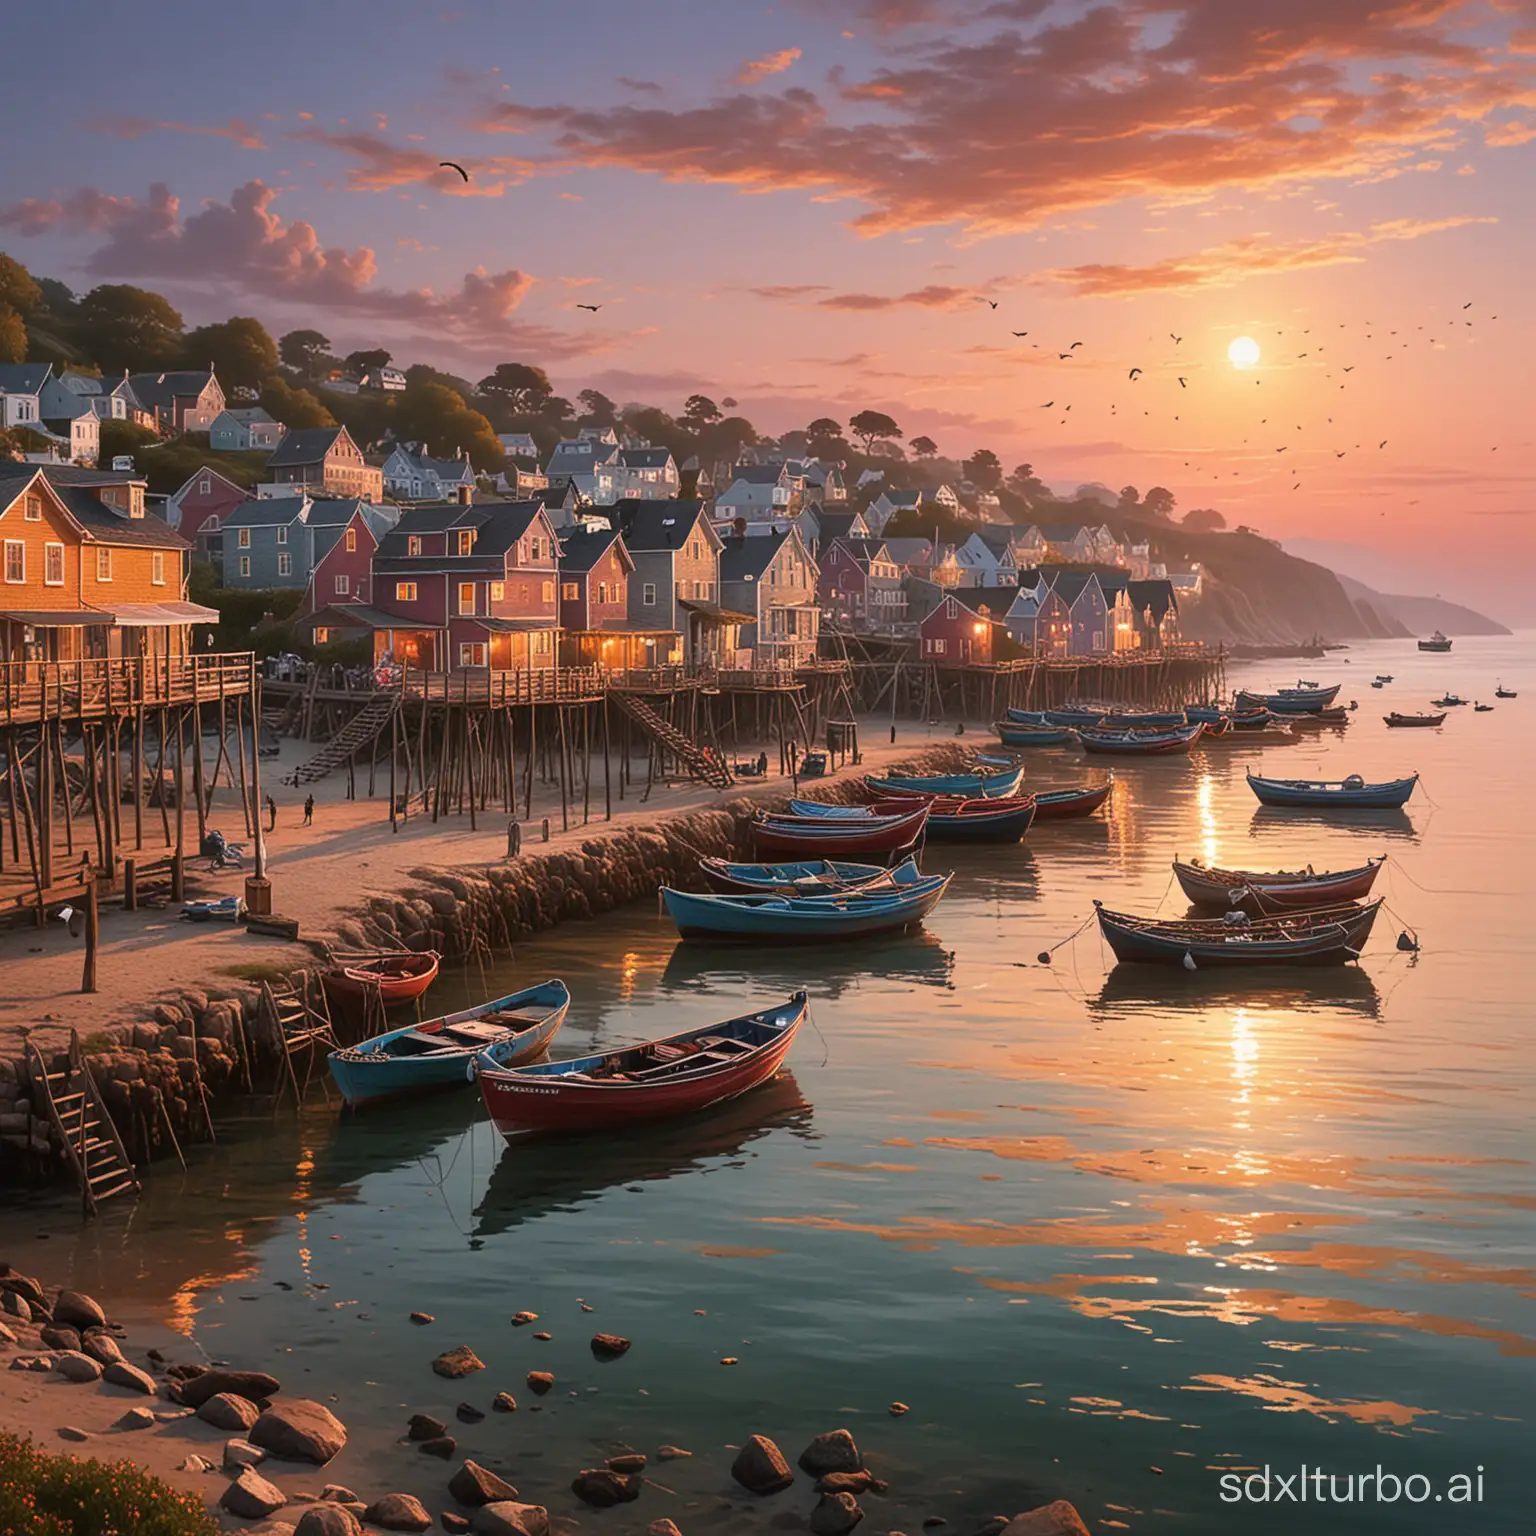 Tranquil-Fishing-Village-at-Dusk-with-Colorful-Boats-and-Cozy-Cottages